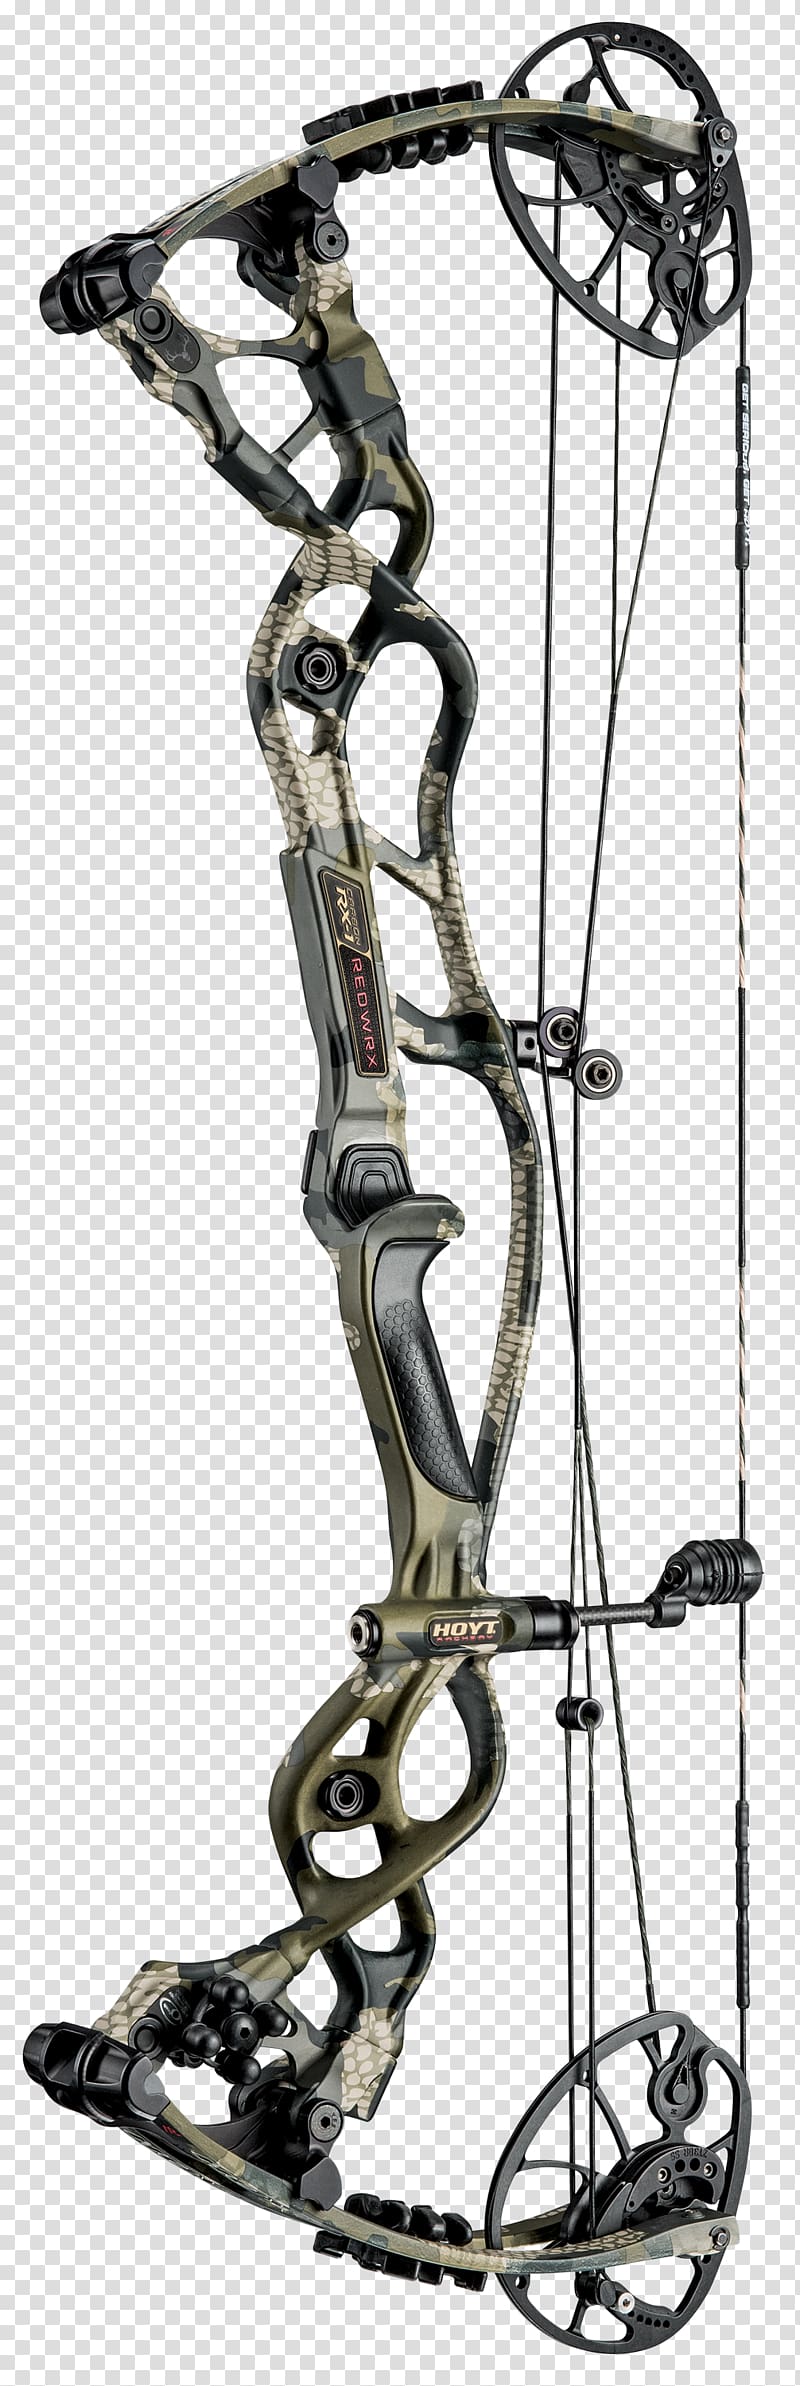 Bow and arrow Compound Bows Hoyt Archery, recurve archery bow slings transparent background PNG clipart